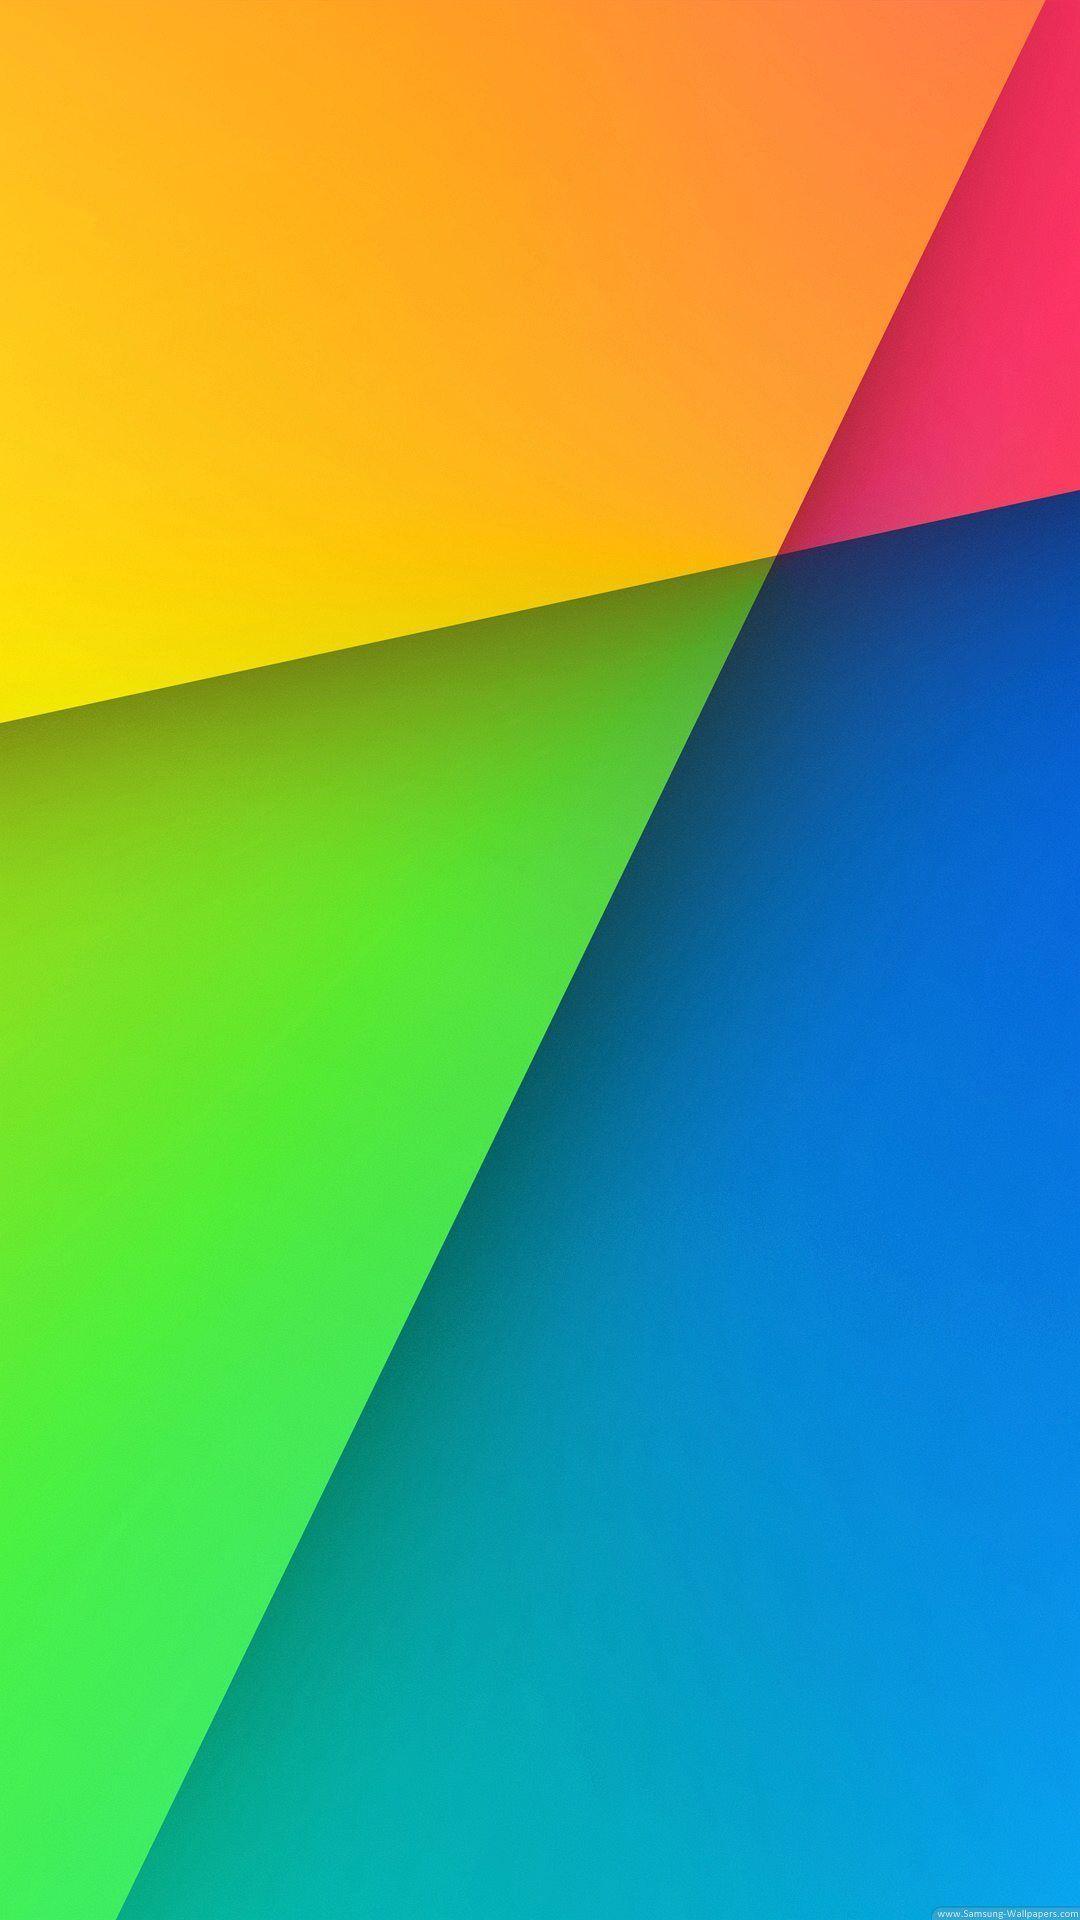 Got a New iPhone? Here are 40 Stunning Wallpaper for It